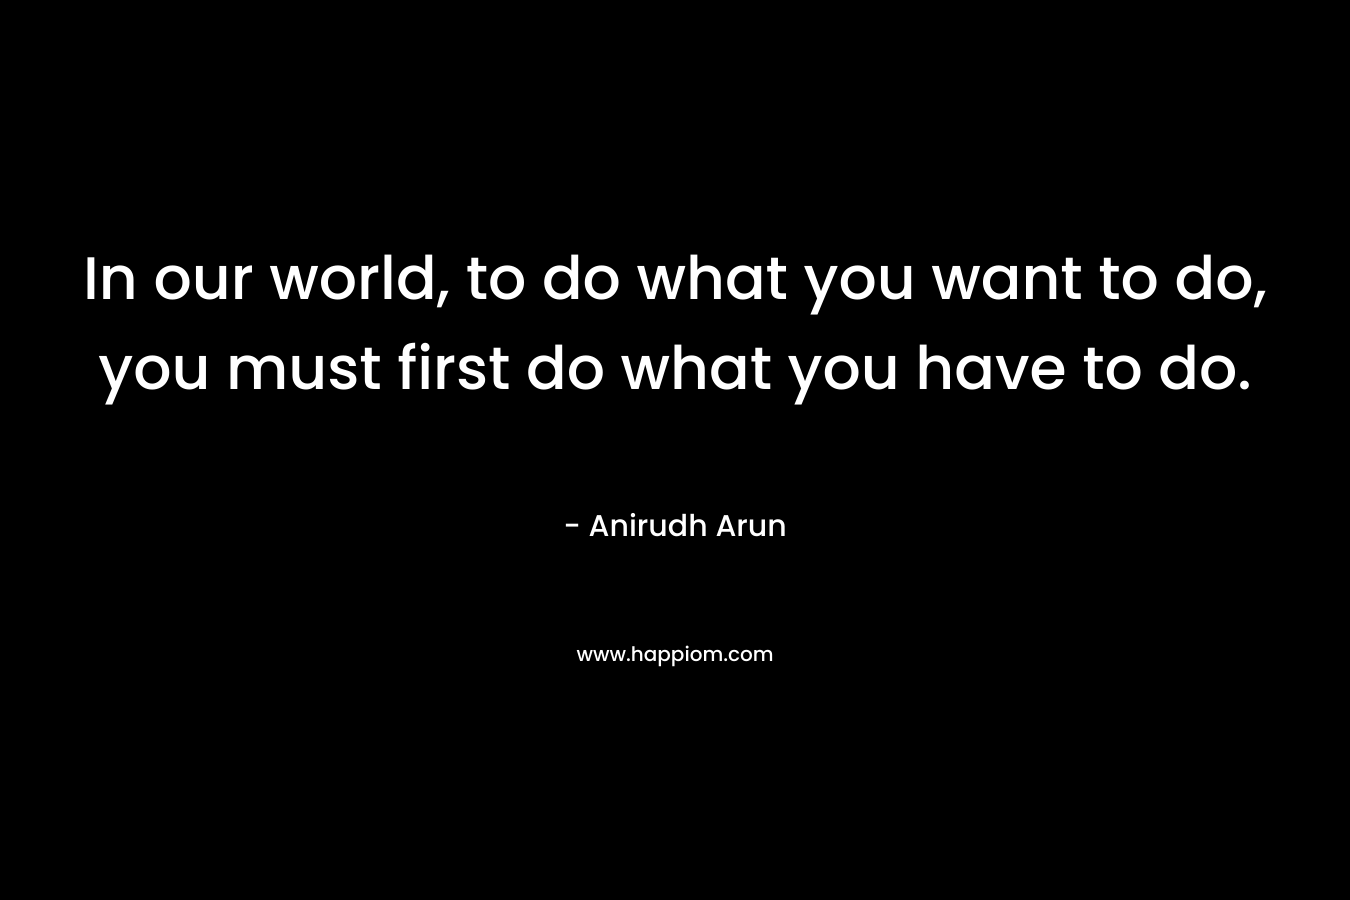 In our world, to do what you want to do, you must first do what you have to do. – Anirudh Arun